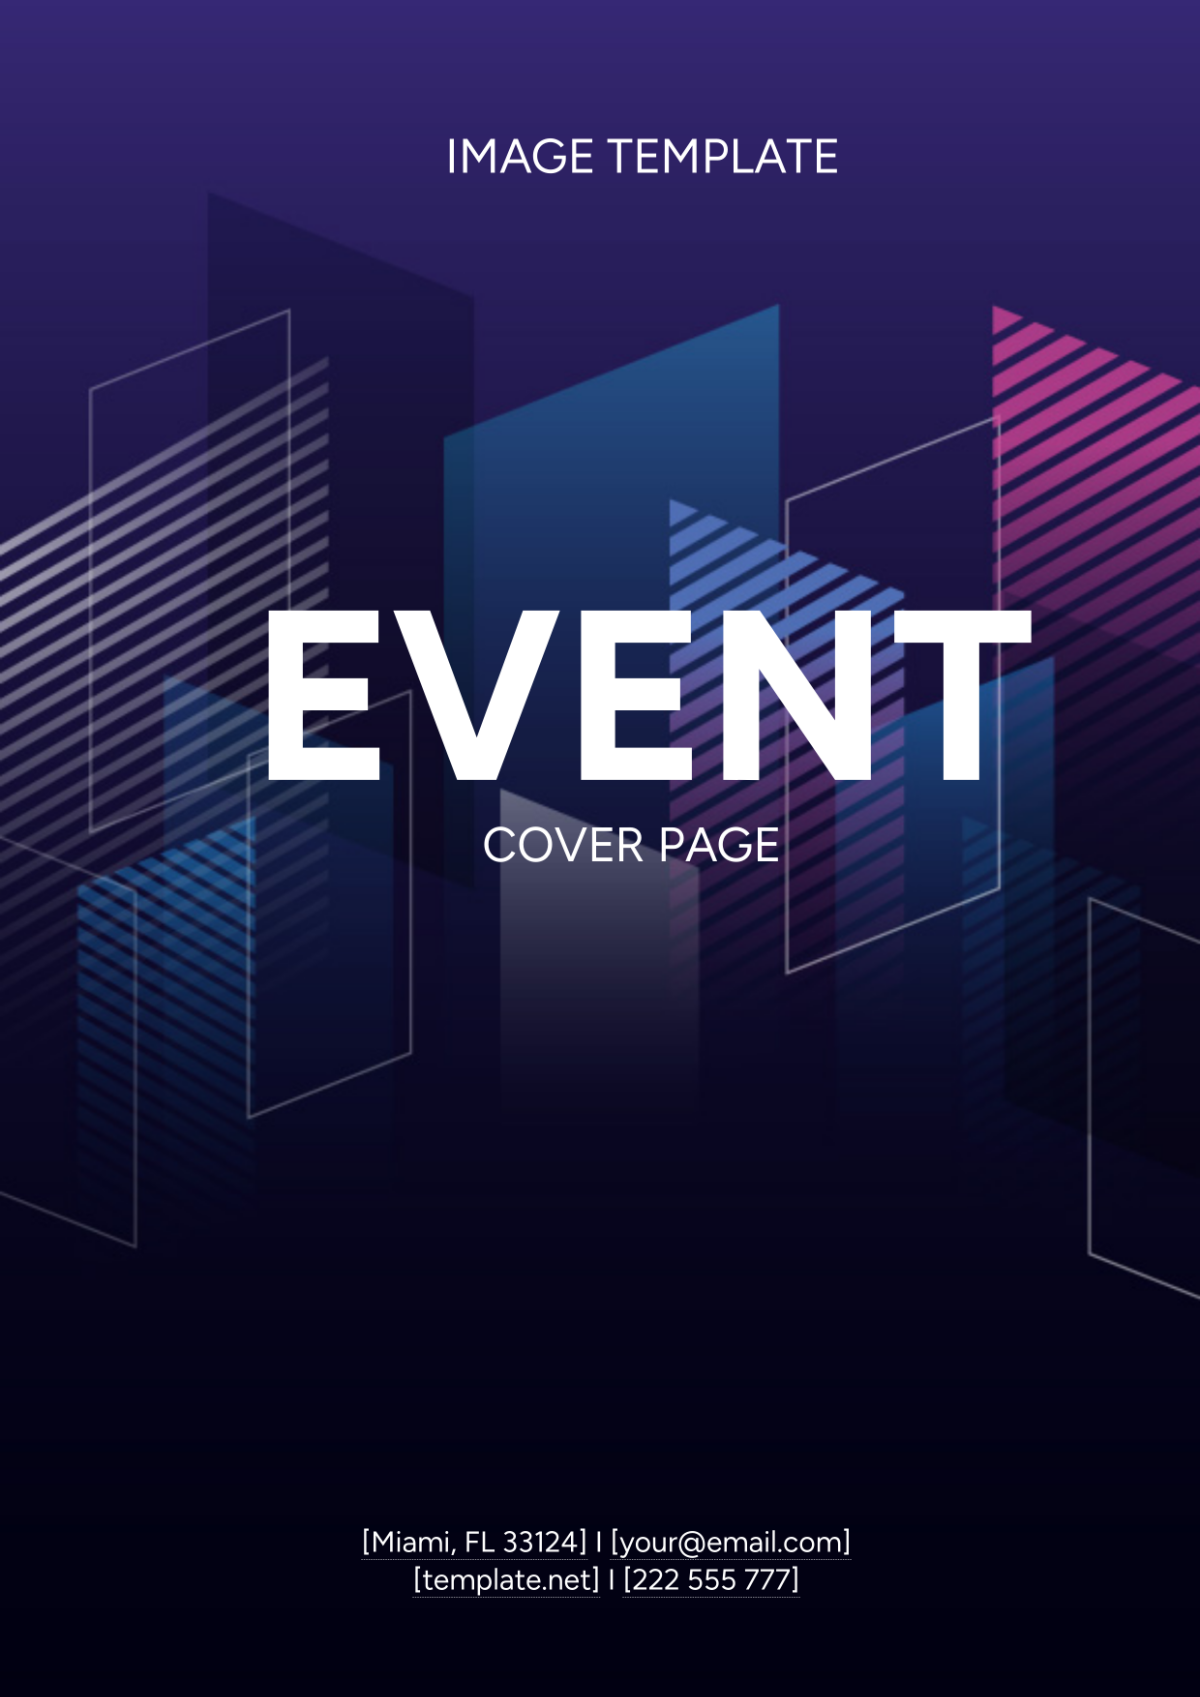 Free Event Cover Page Image Template